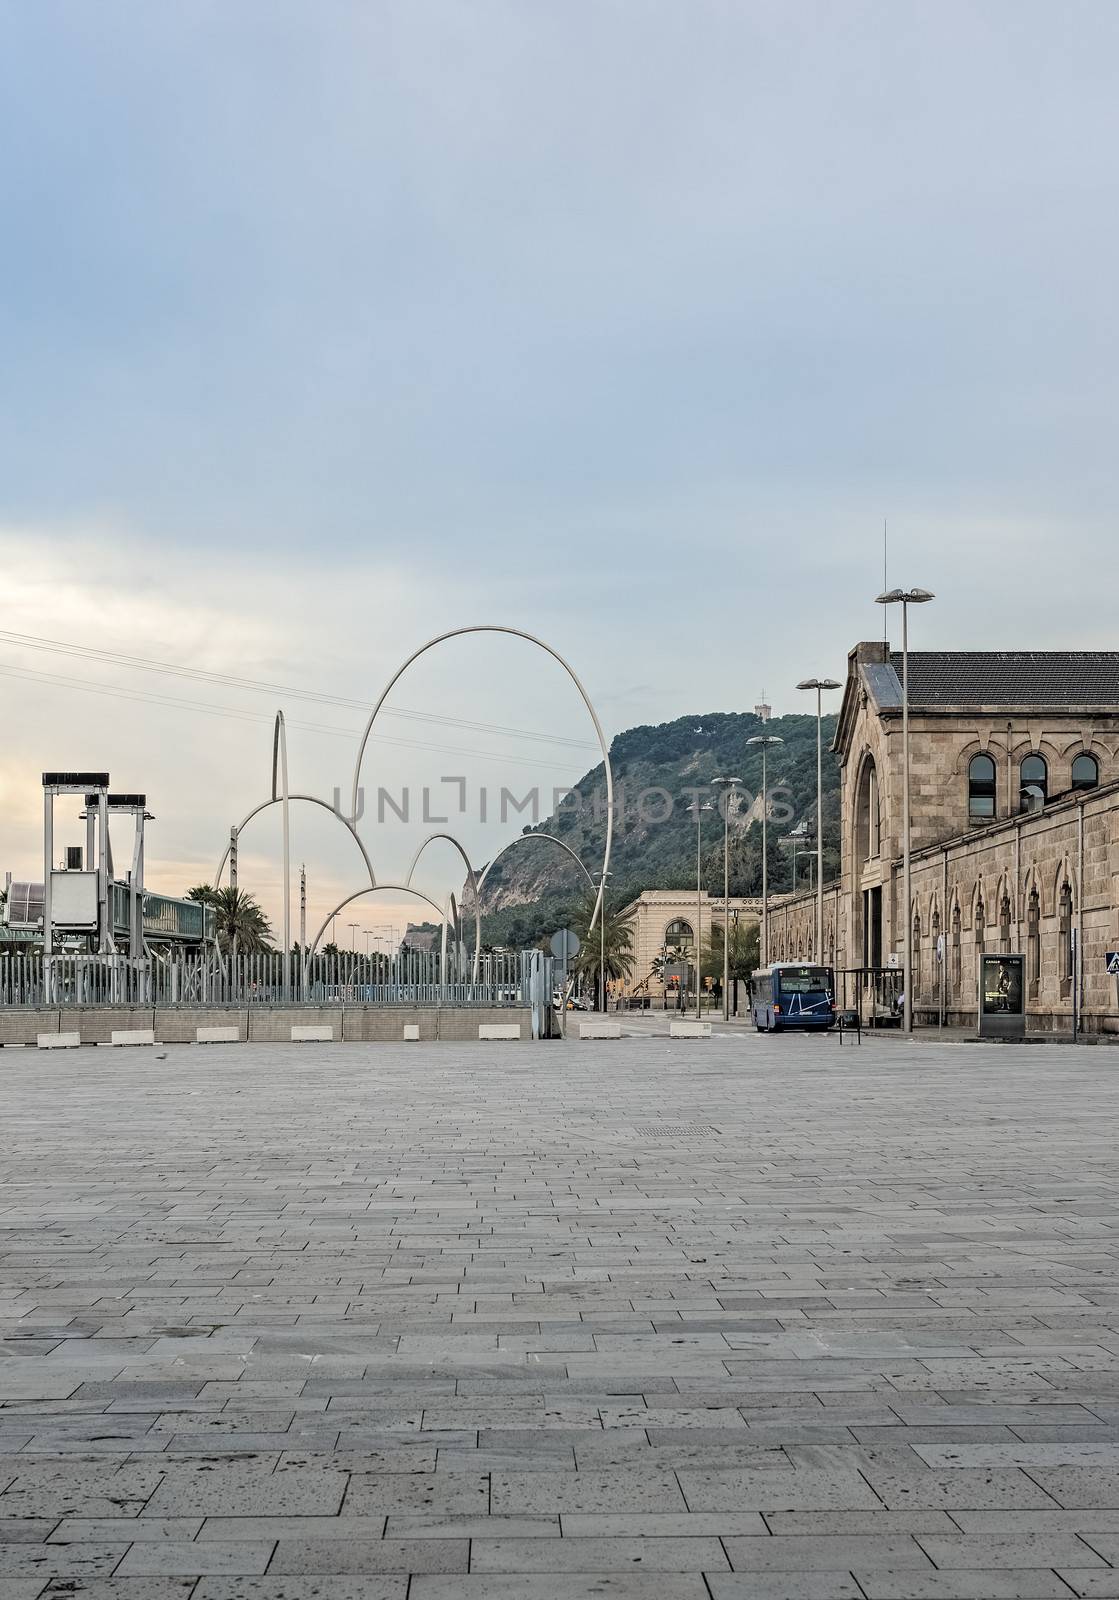 Barcelona, Spain - November 11, 2013: View at Olympic rings in front of Port in Barcelona, Spain.